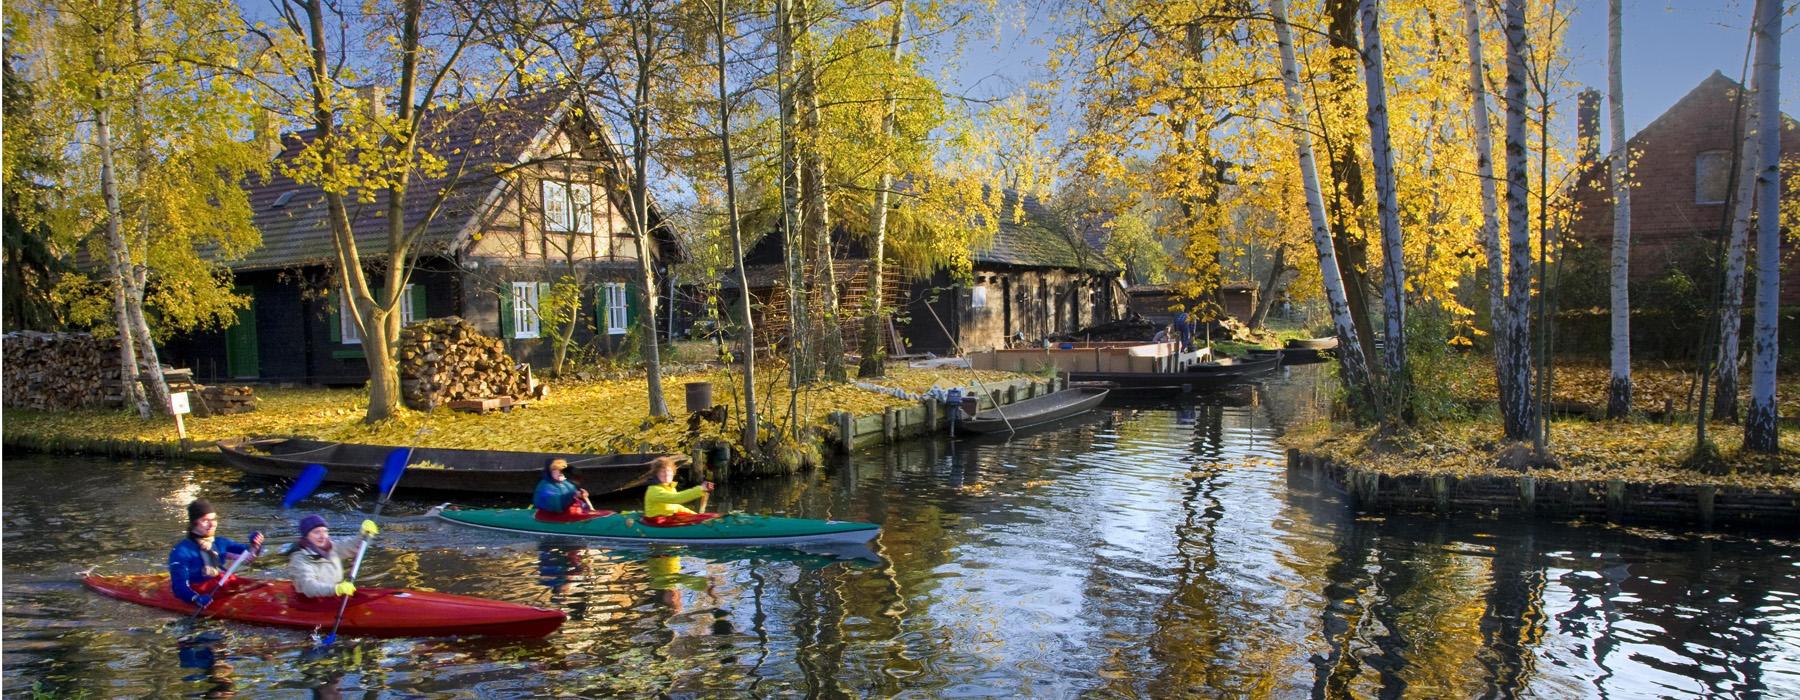 Canoeing tour in the Spreewald